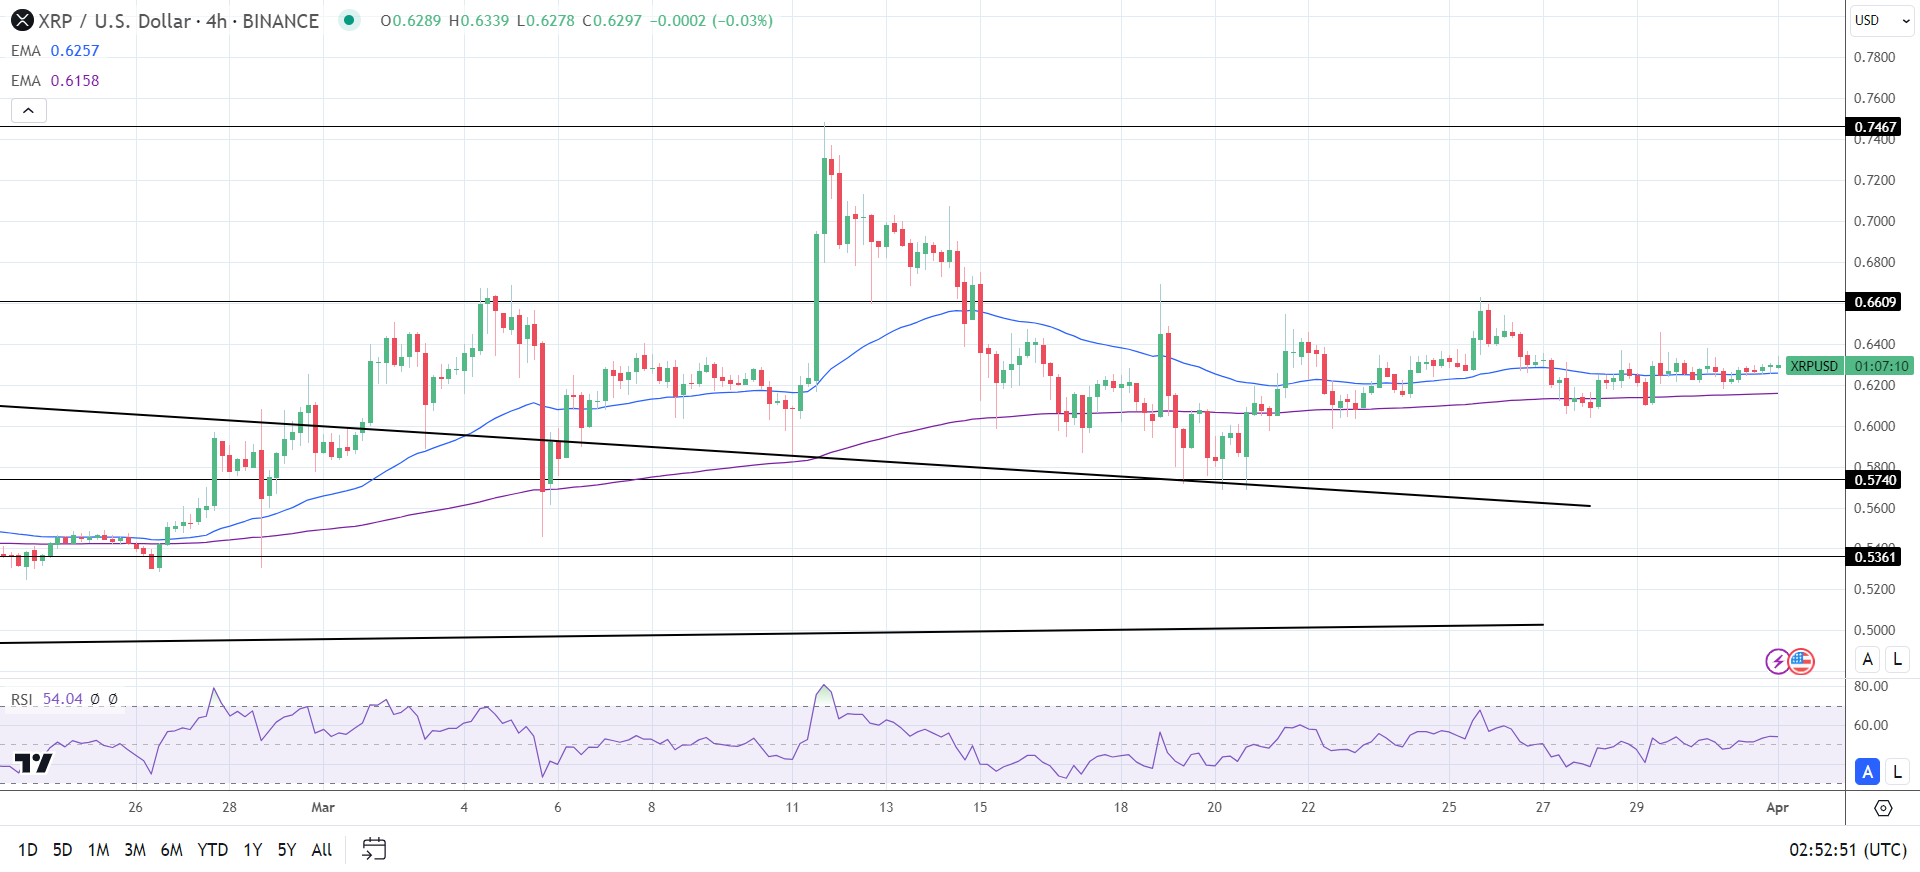 XRP 4-Hourly Chart confirms the bullish price trends